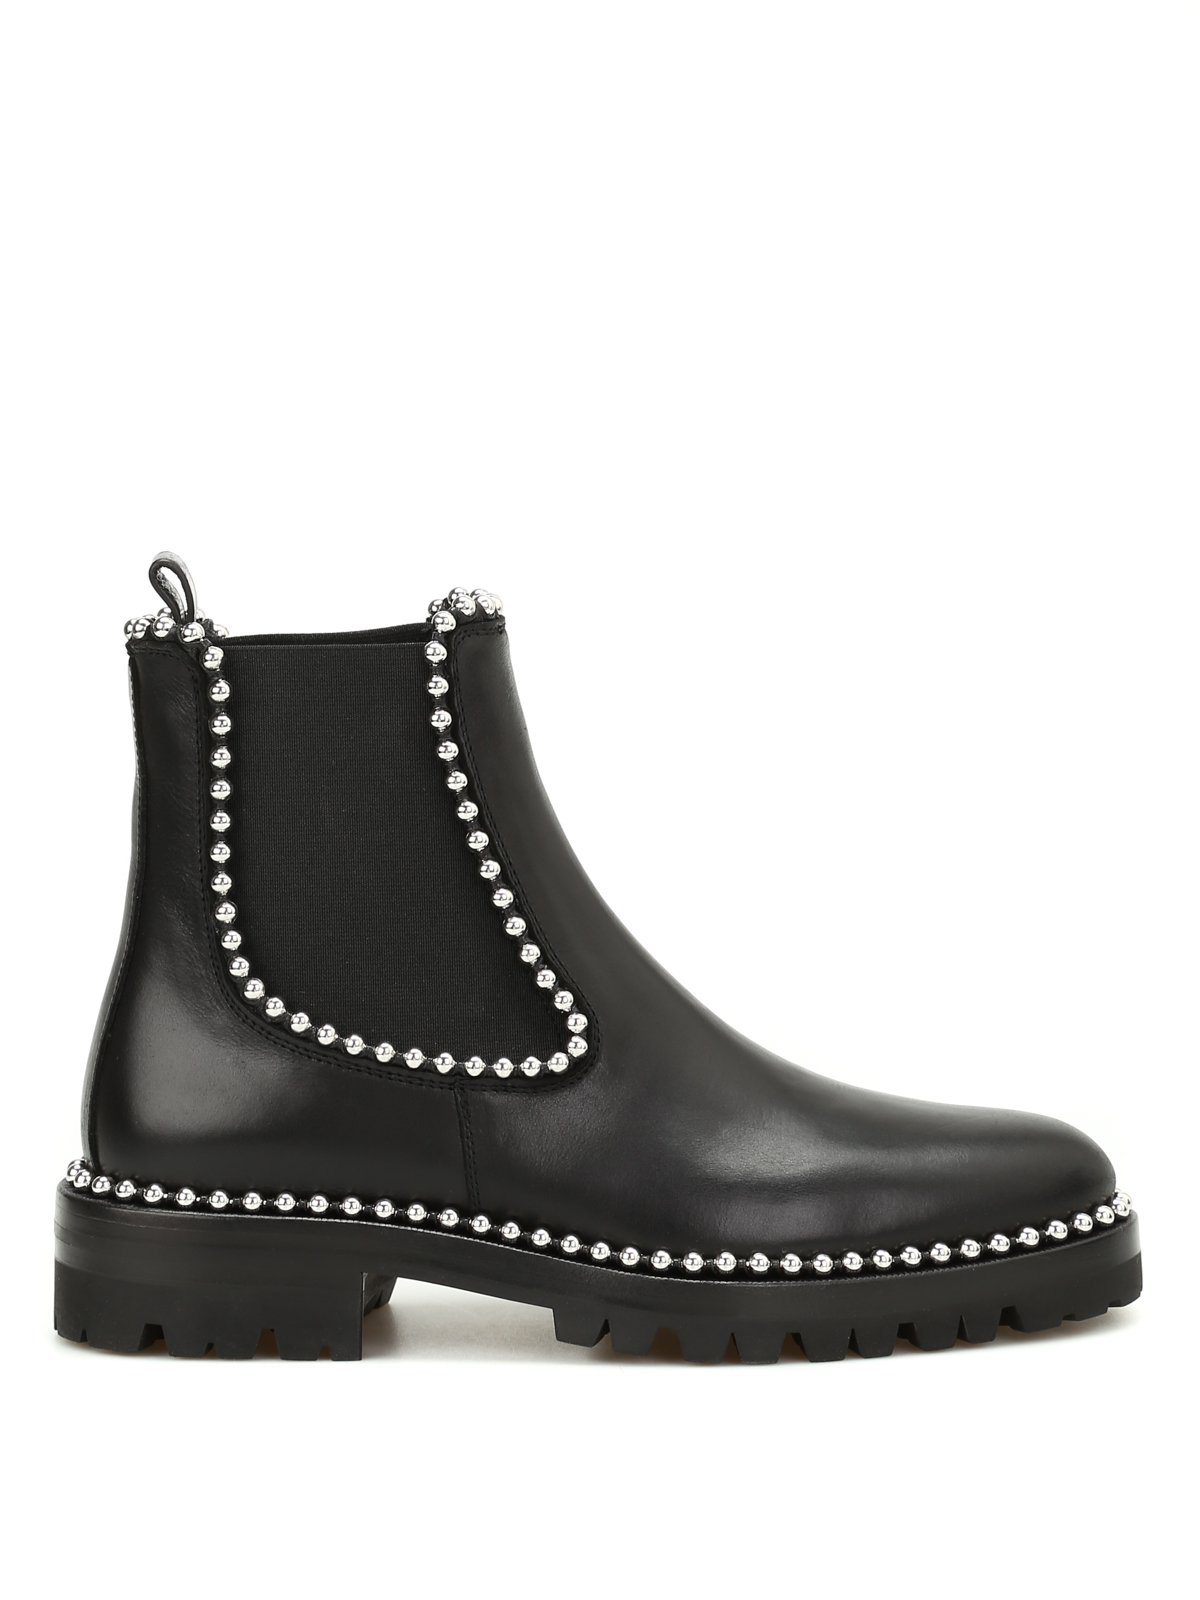 modtage Armstrong æg Ankle boots Alexander Wang - Spencer studded ankle boots - 3027B0013L001